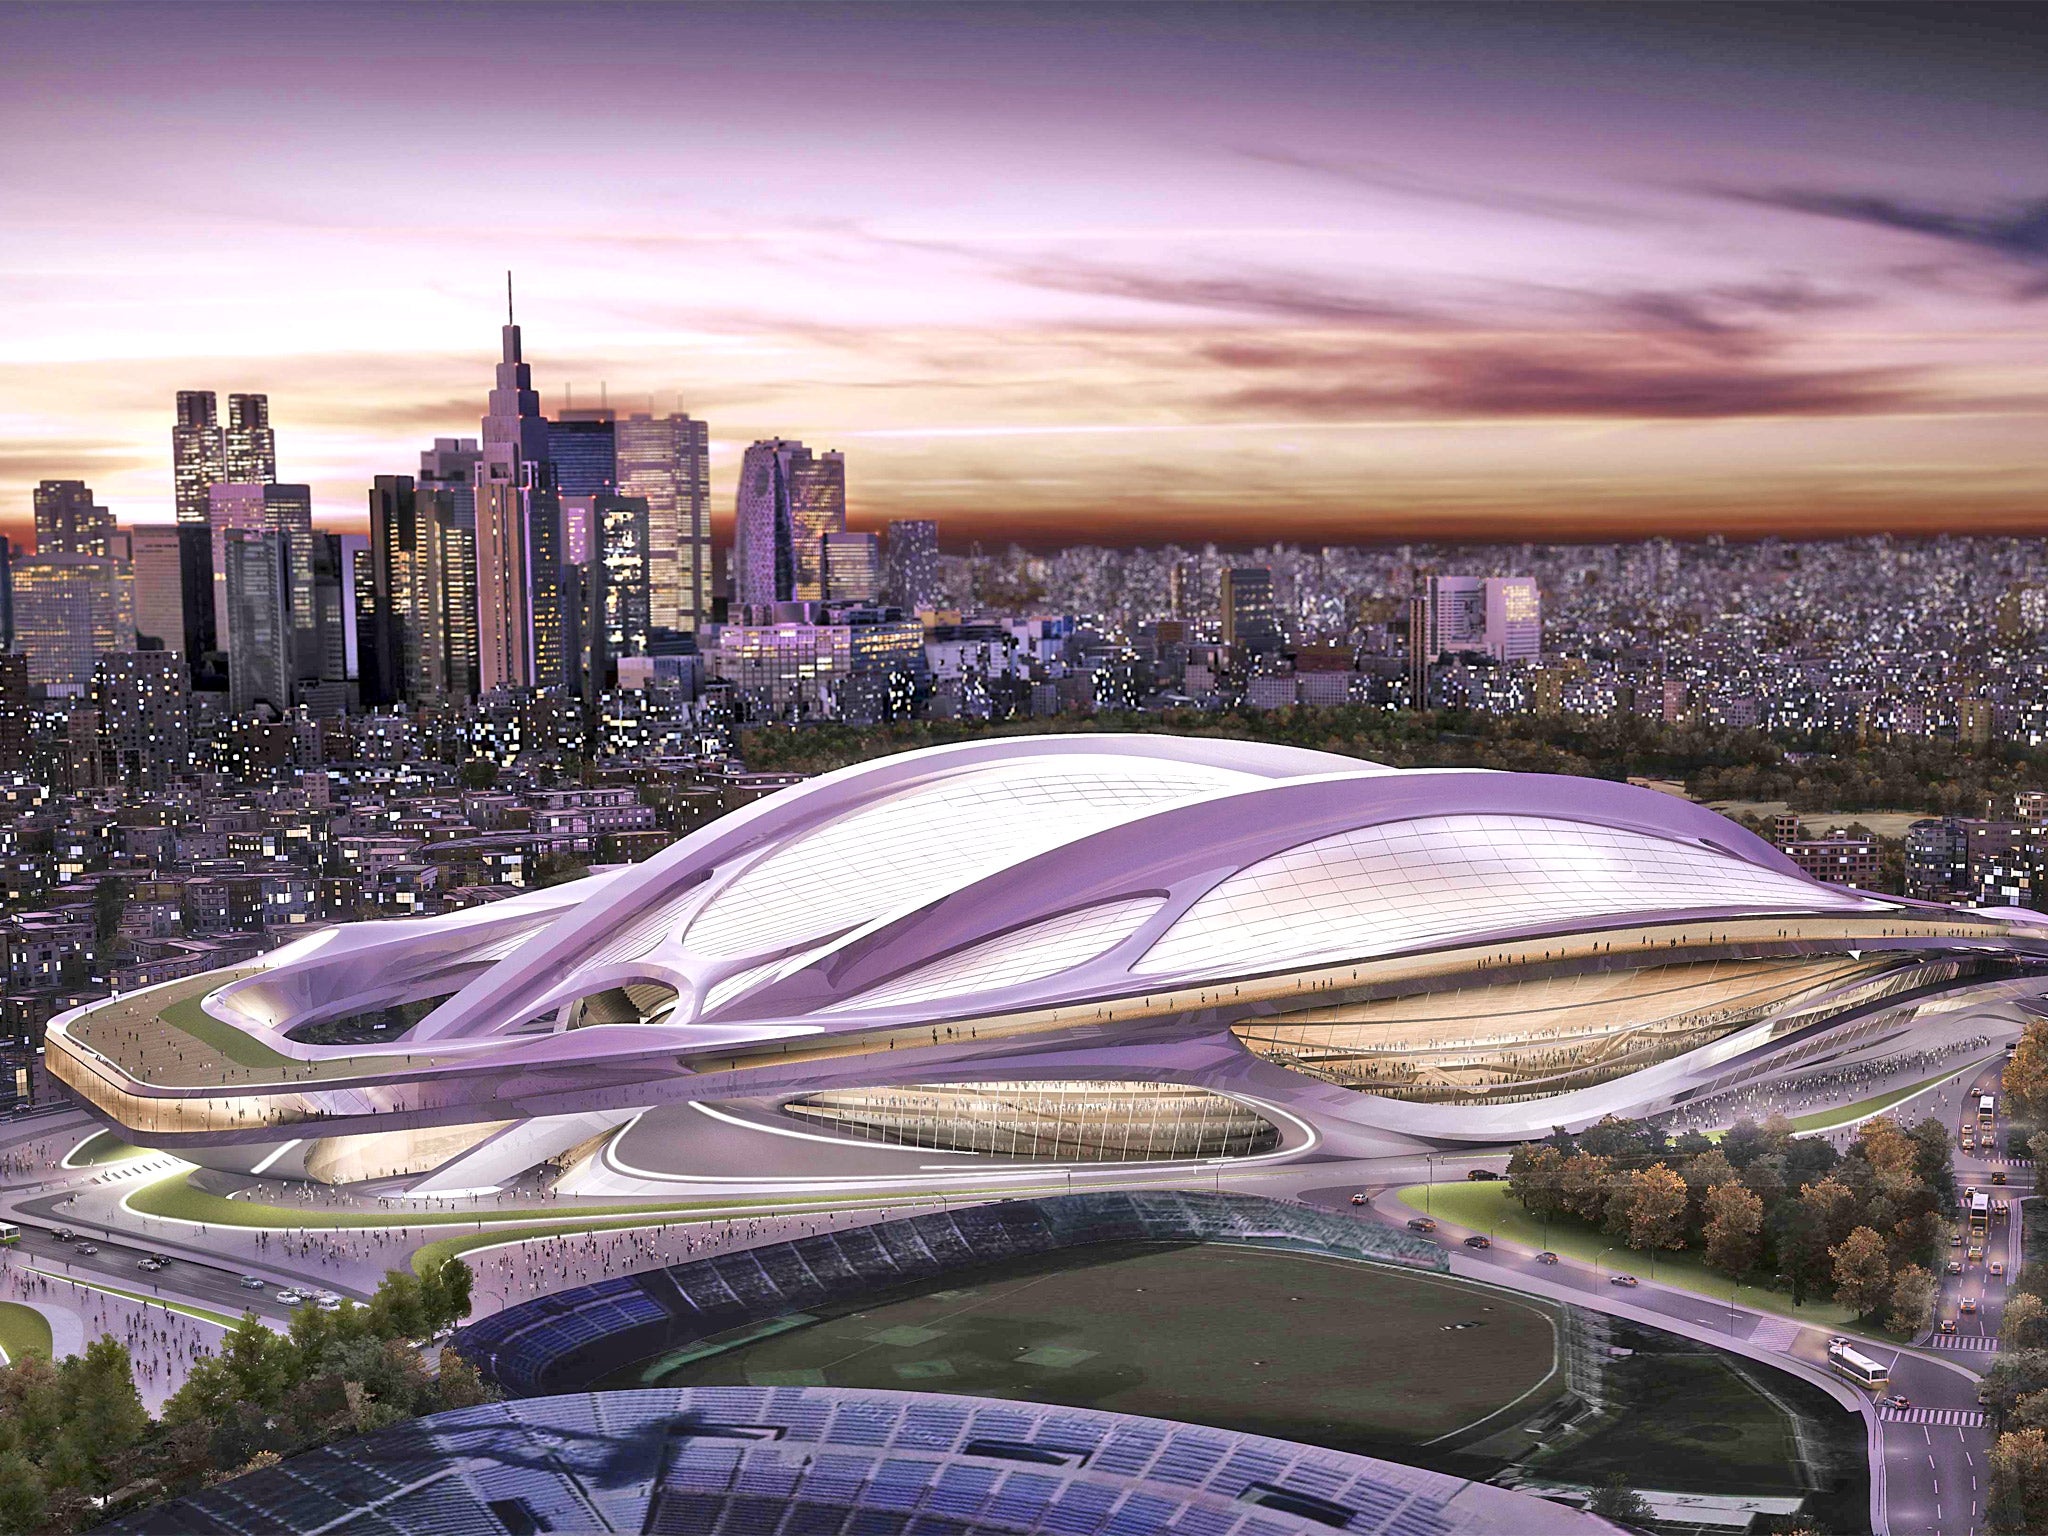 Zaha Hadid's design for the new National Stadium in Tokyo